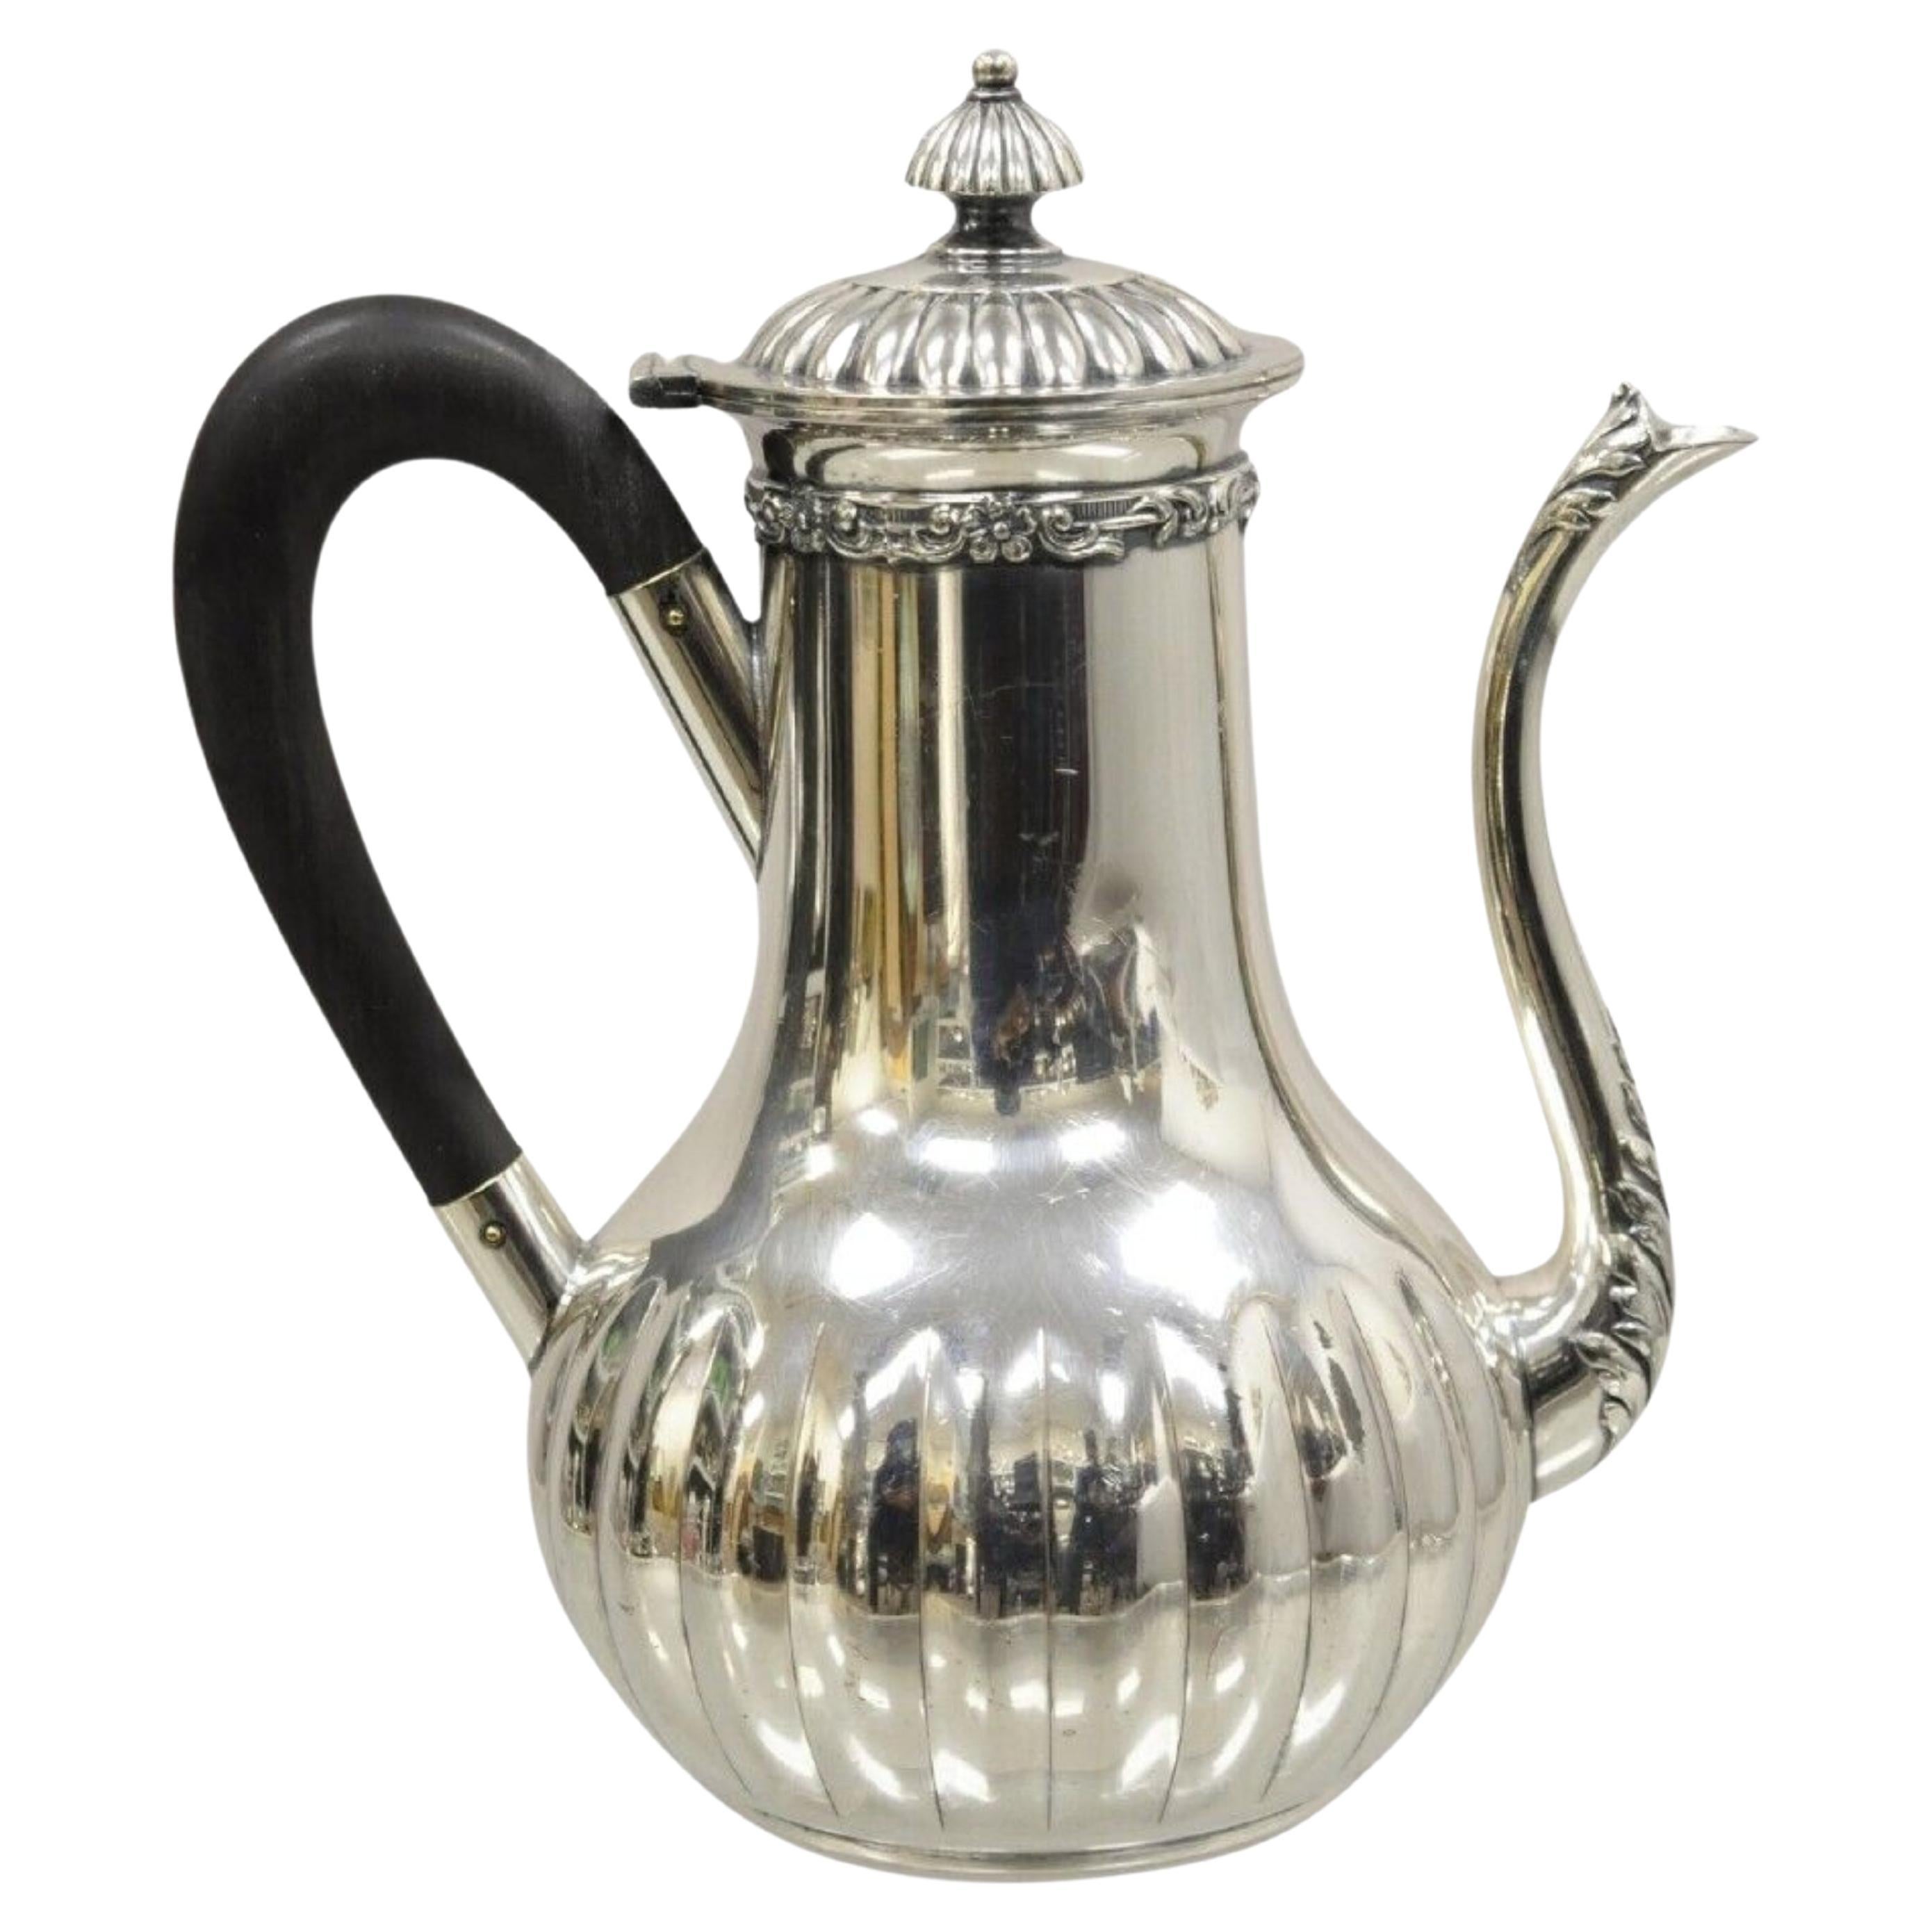 Antique English Edwardian James W Tufts Silver Plated Tea Pot Coffee Pot For Sale